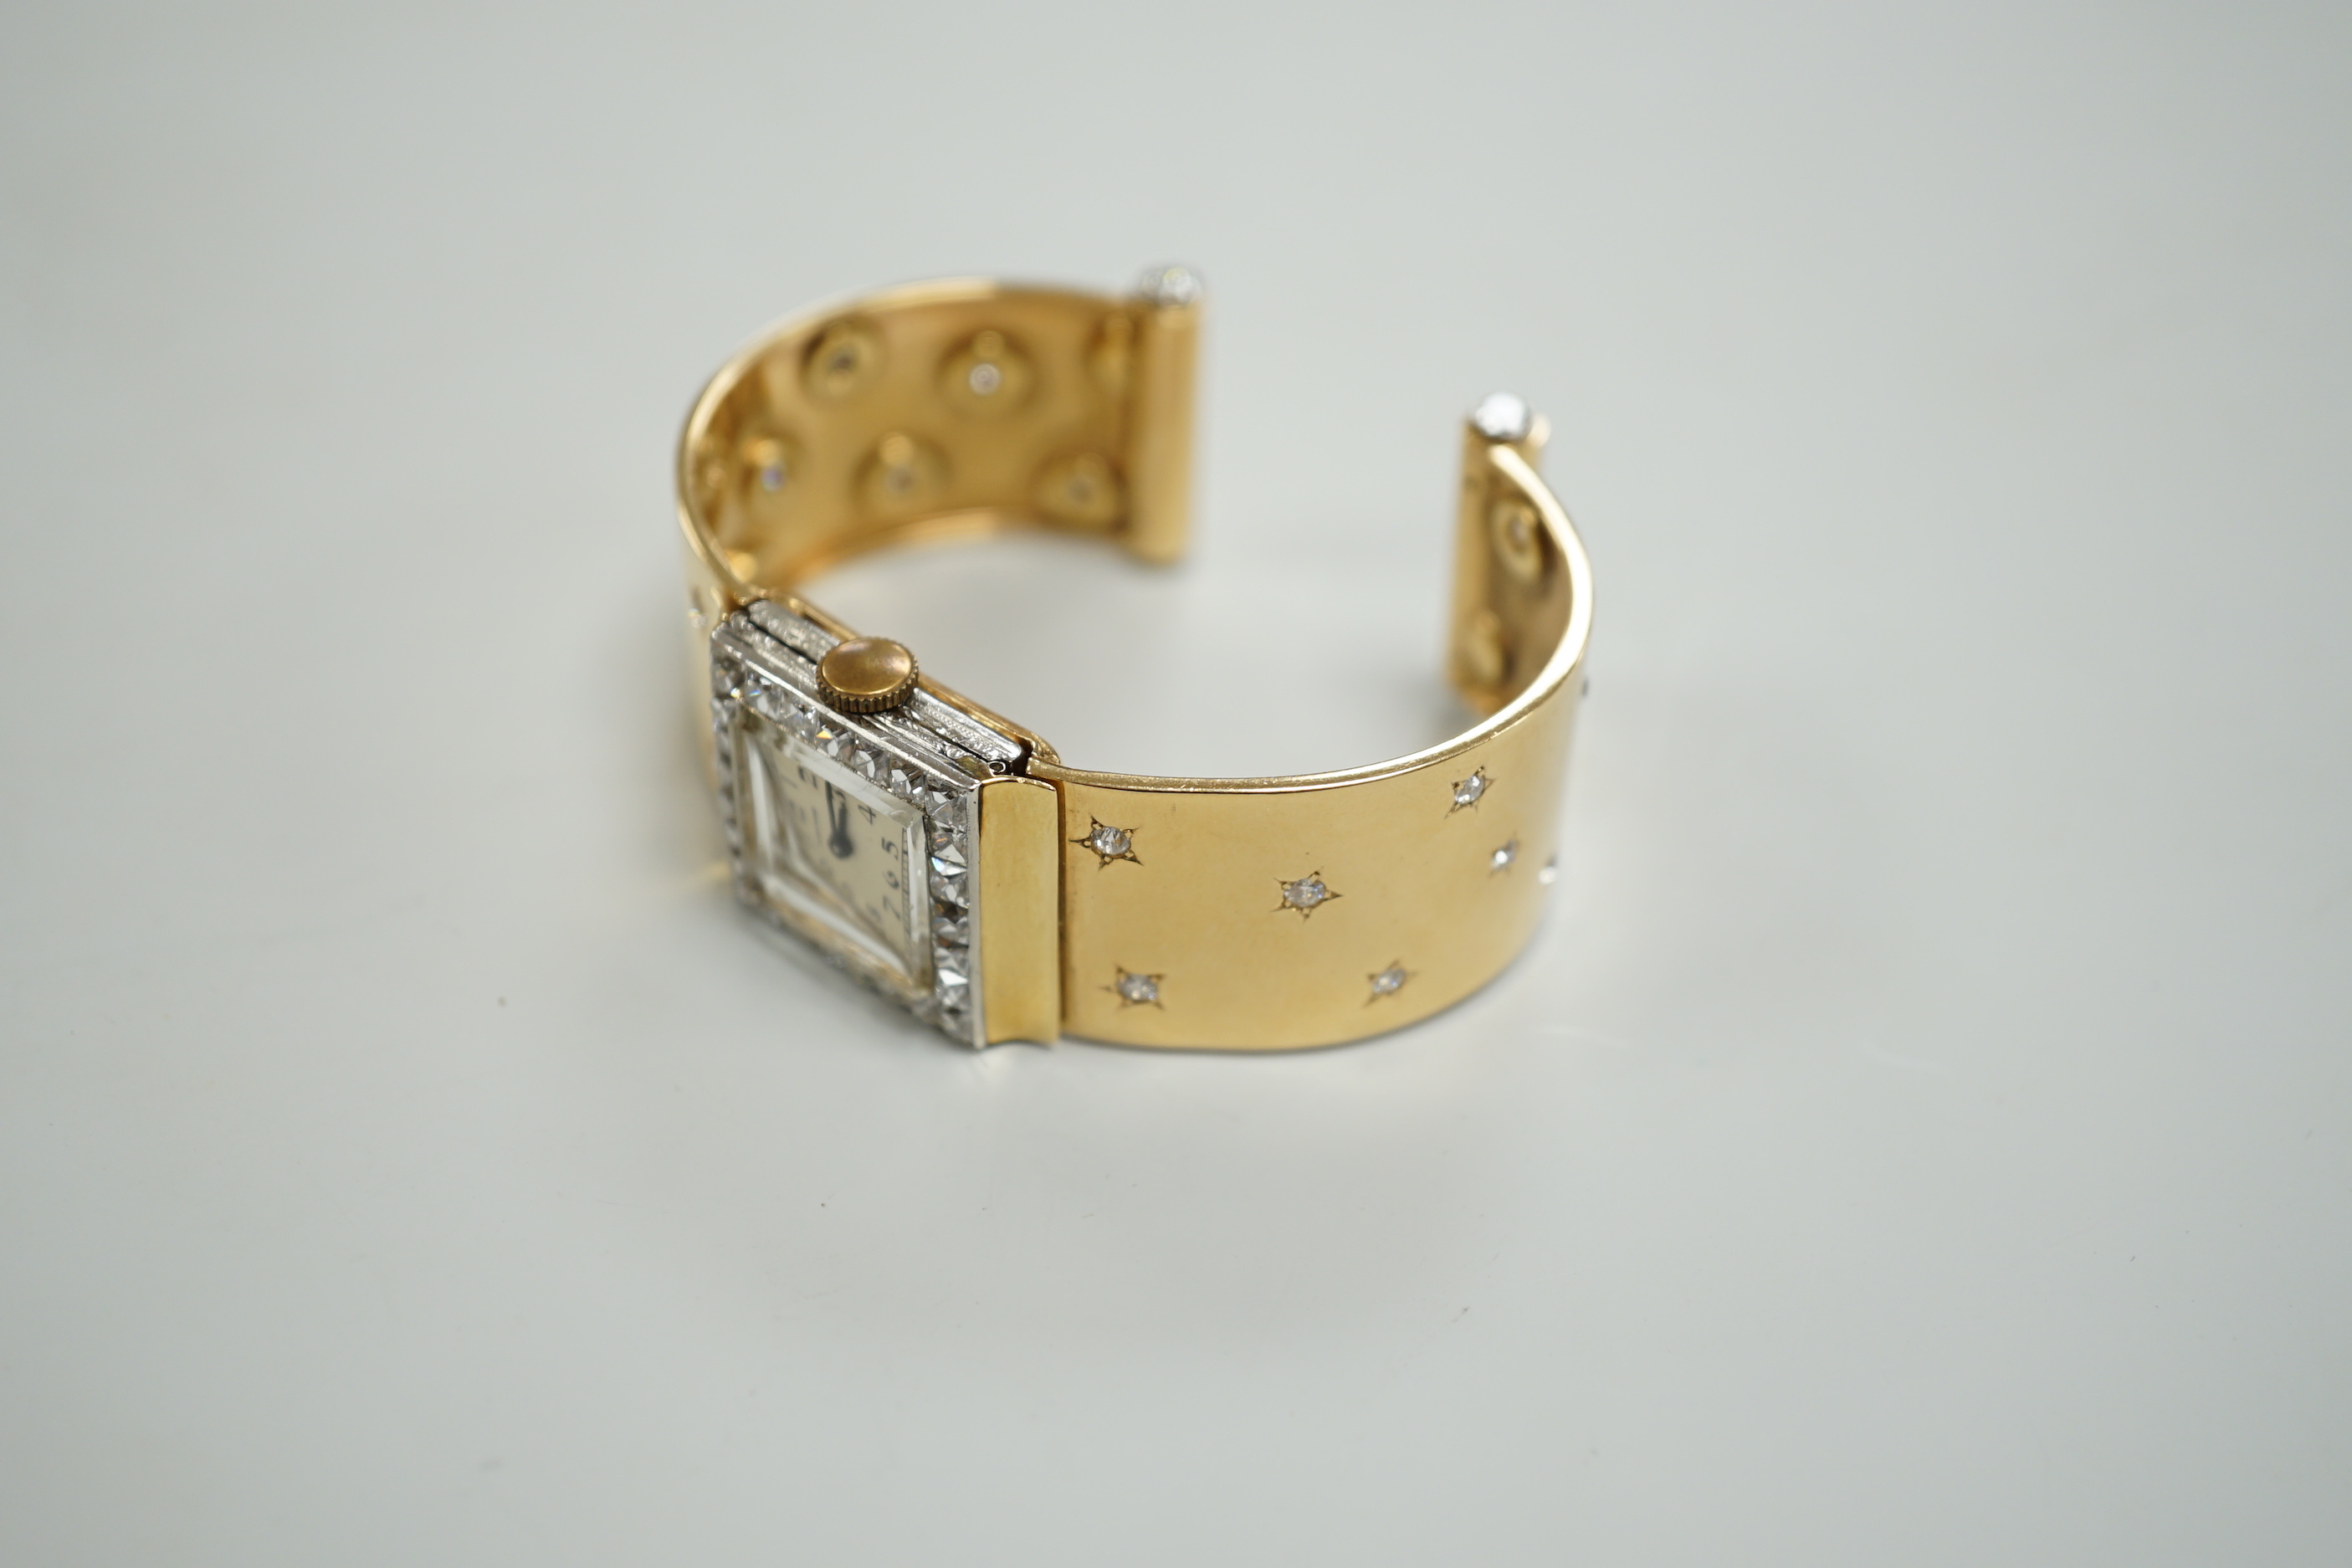 A yellow metal and diamond set Concorde manual wind open bracelet watch, with diamond set bezel and bracelet, gross weight 47.8 grams.